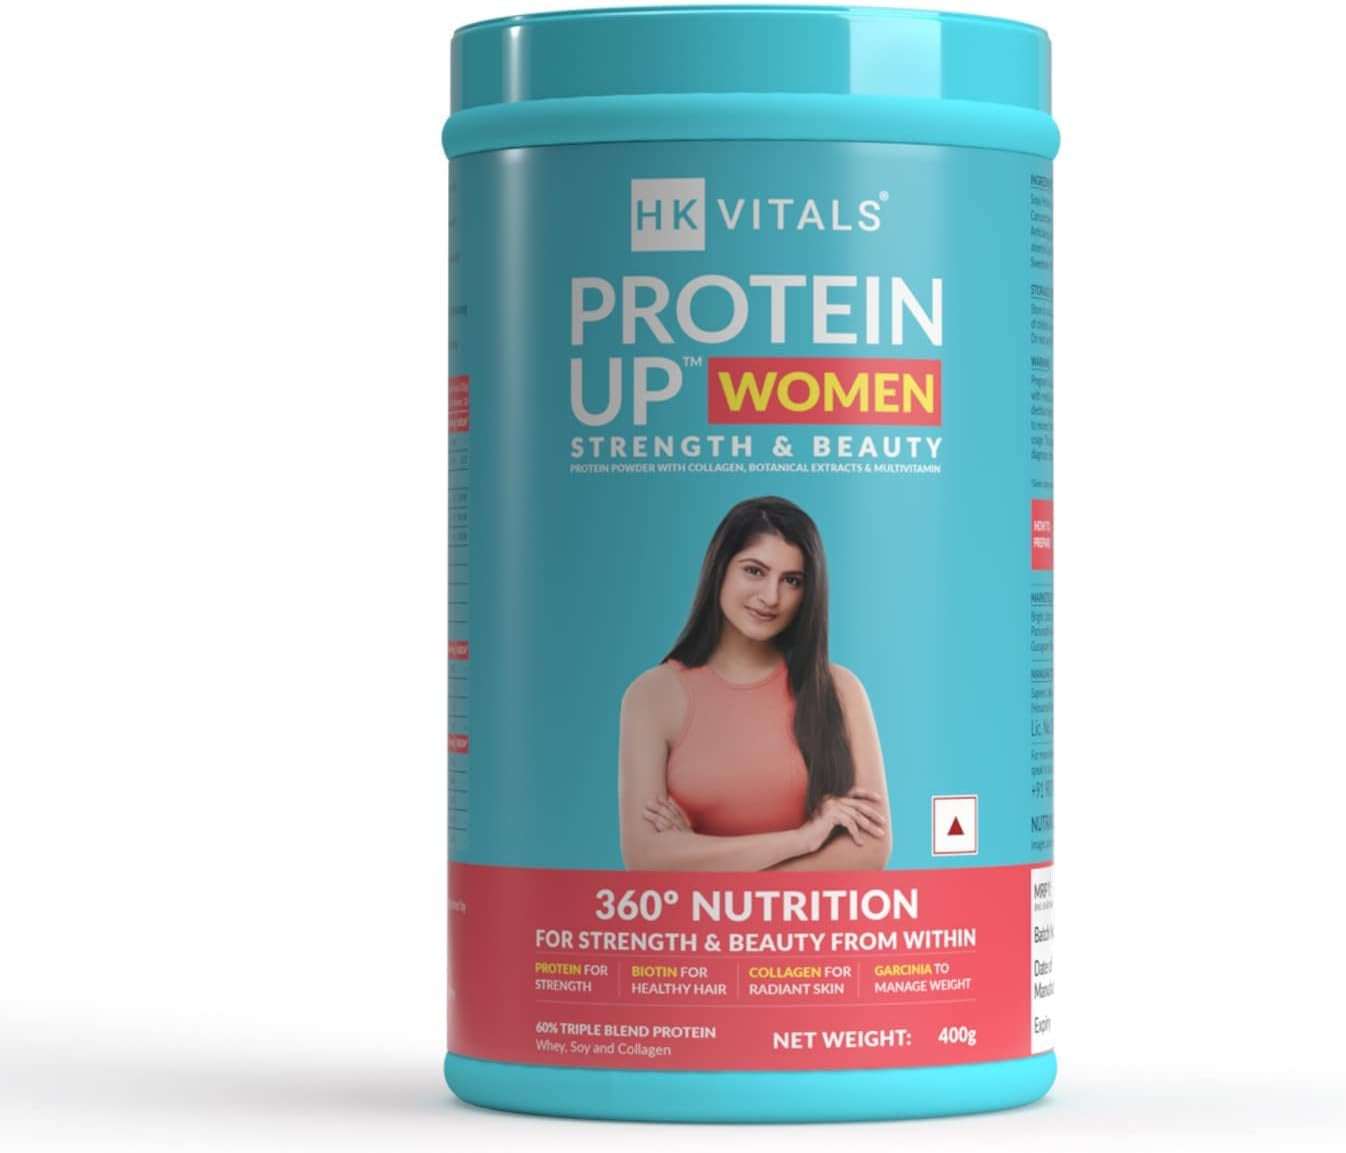 HK Vitals Proteinup Women with Soy, Whey Protein, Collagen, Vitamin C, E & Biotin for Strength and Beauty from within (Chocolate, 400 G / 0.88 Lb)